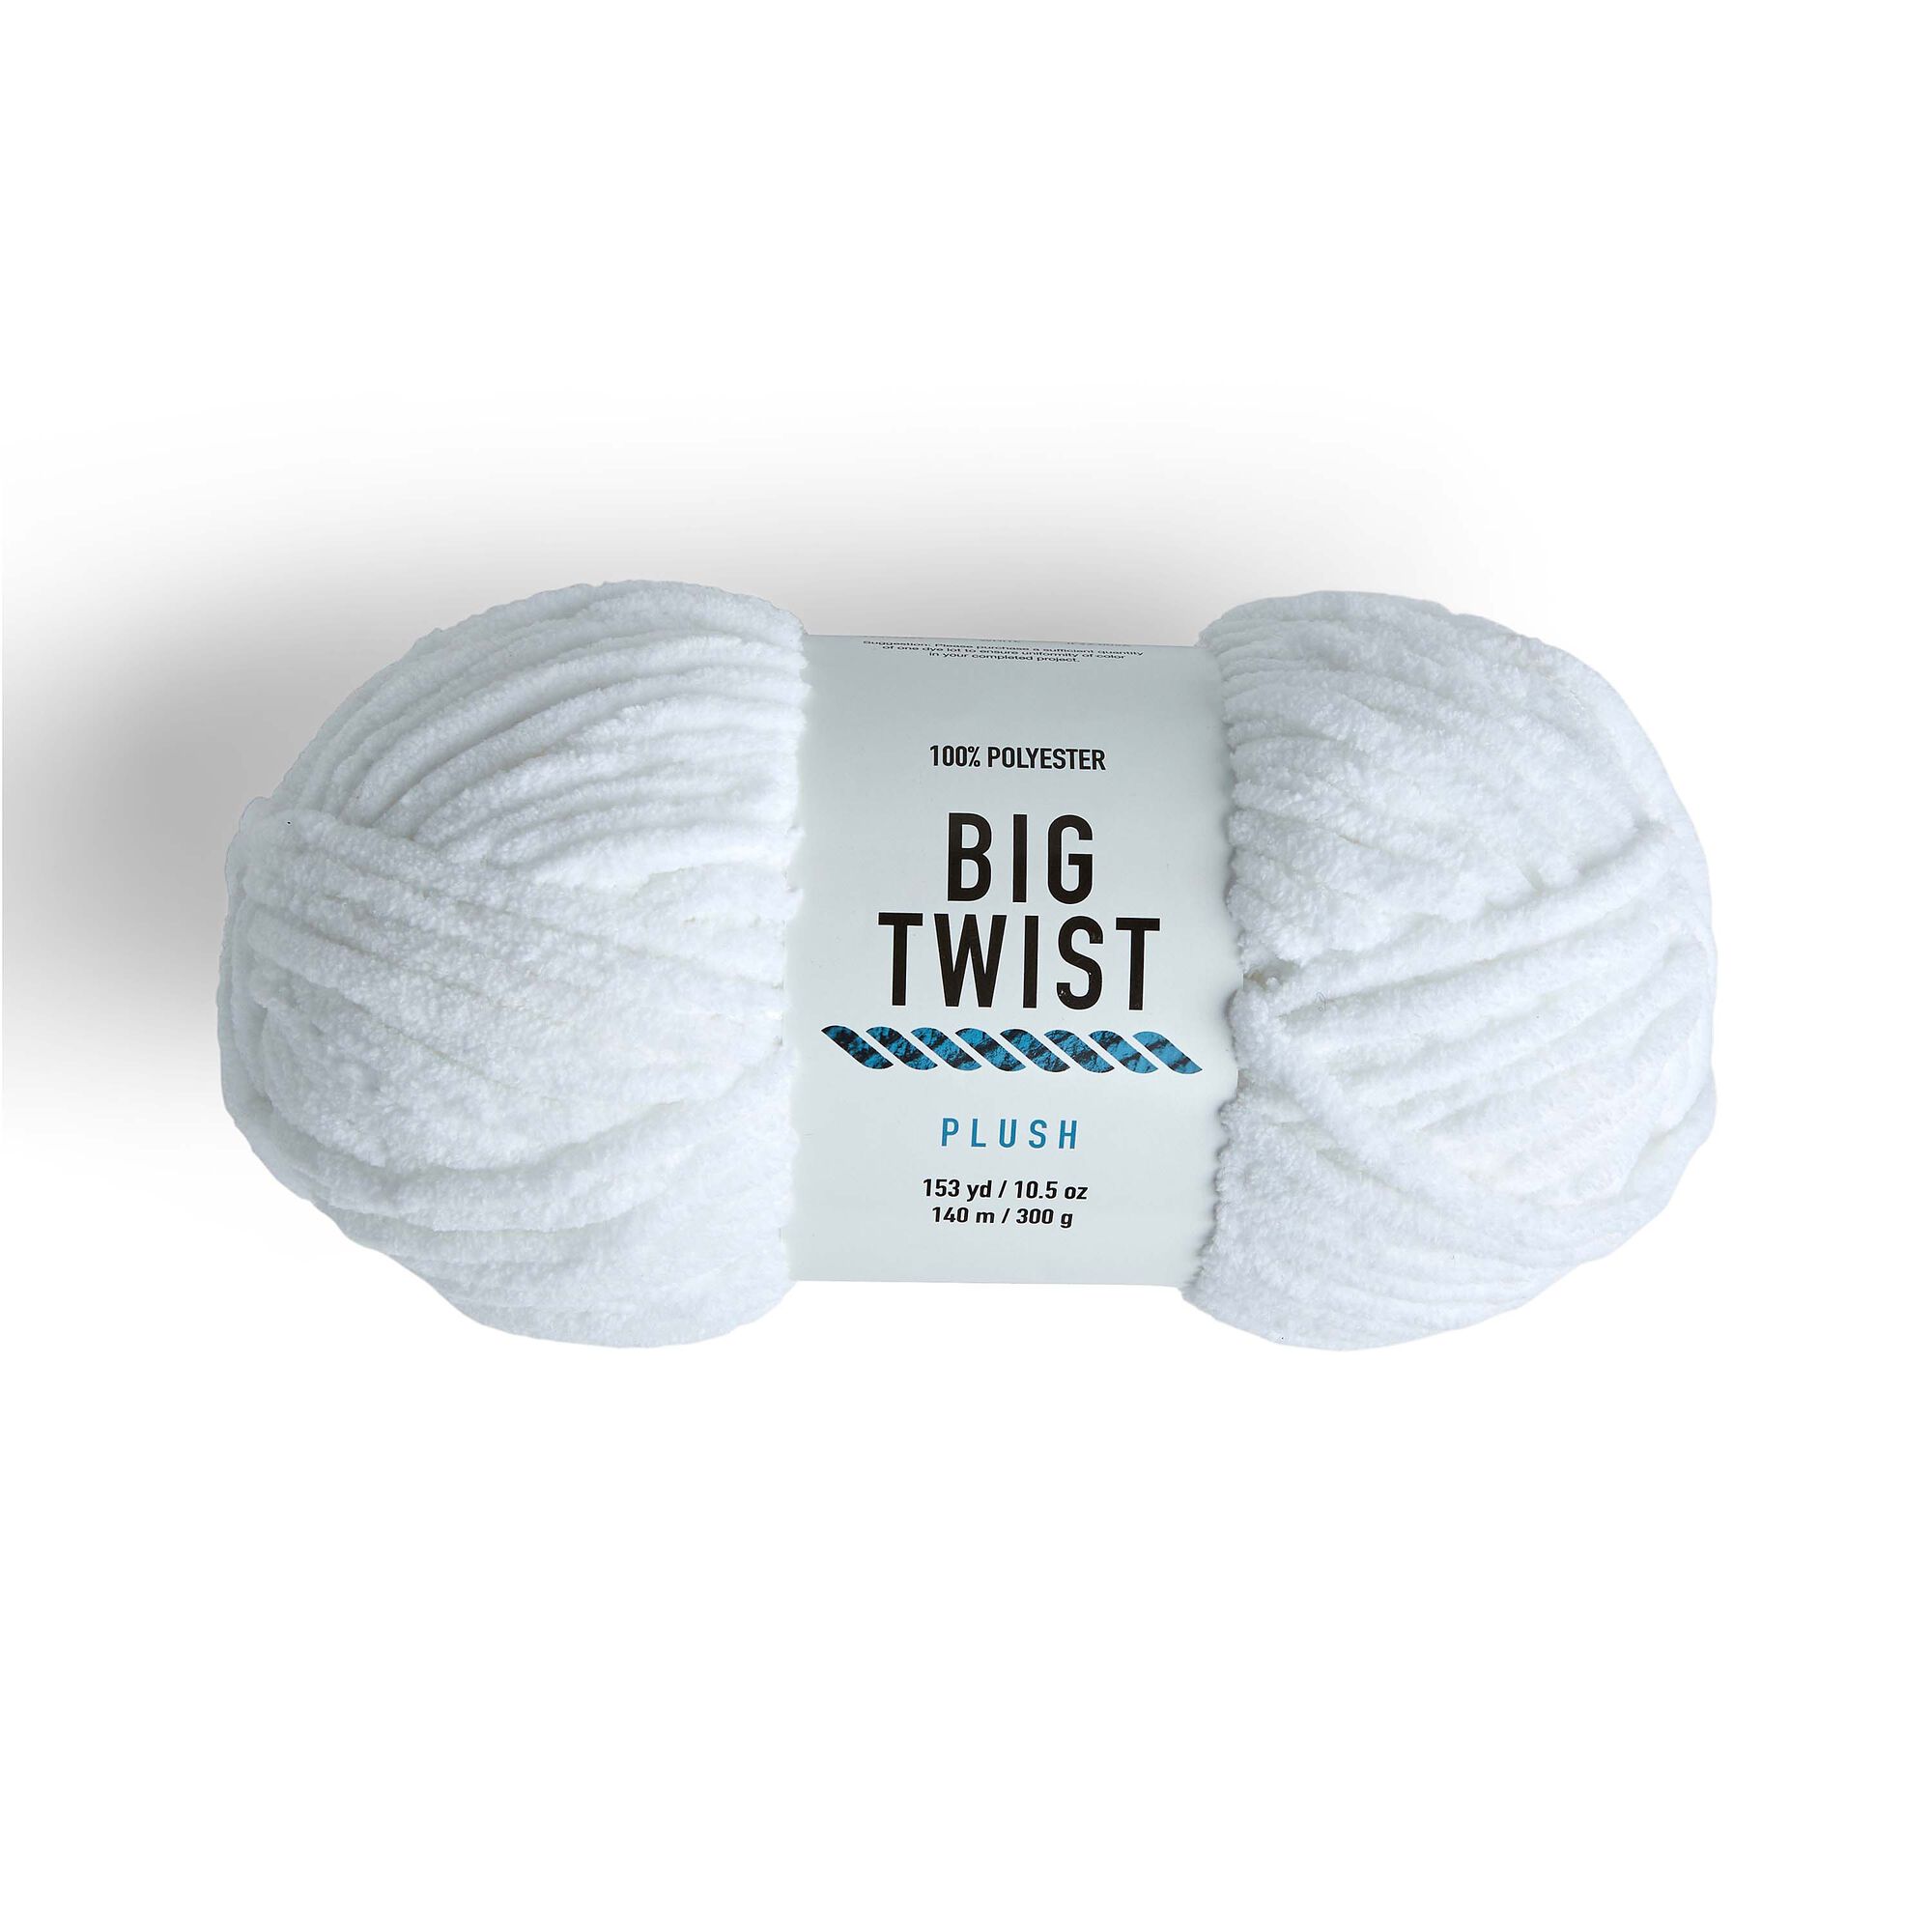 Yarn that Feels Like Your Favorite T-Shirt - Comfy Cotton Blend Review! 